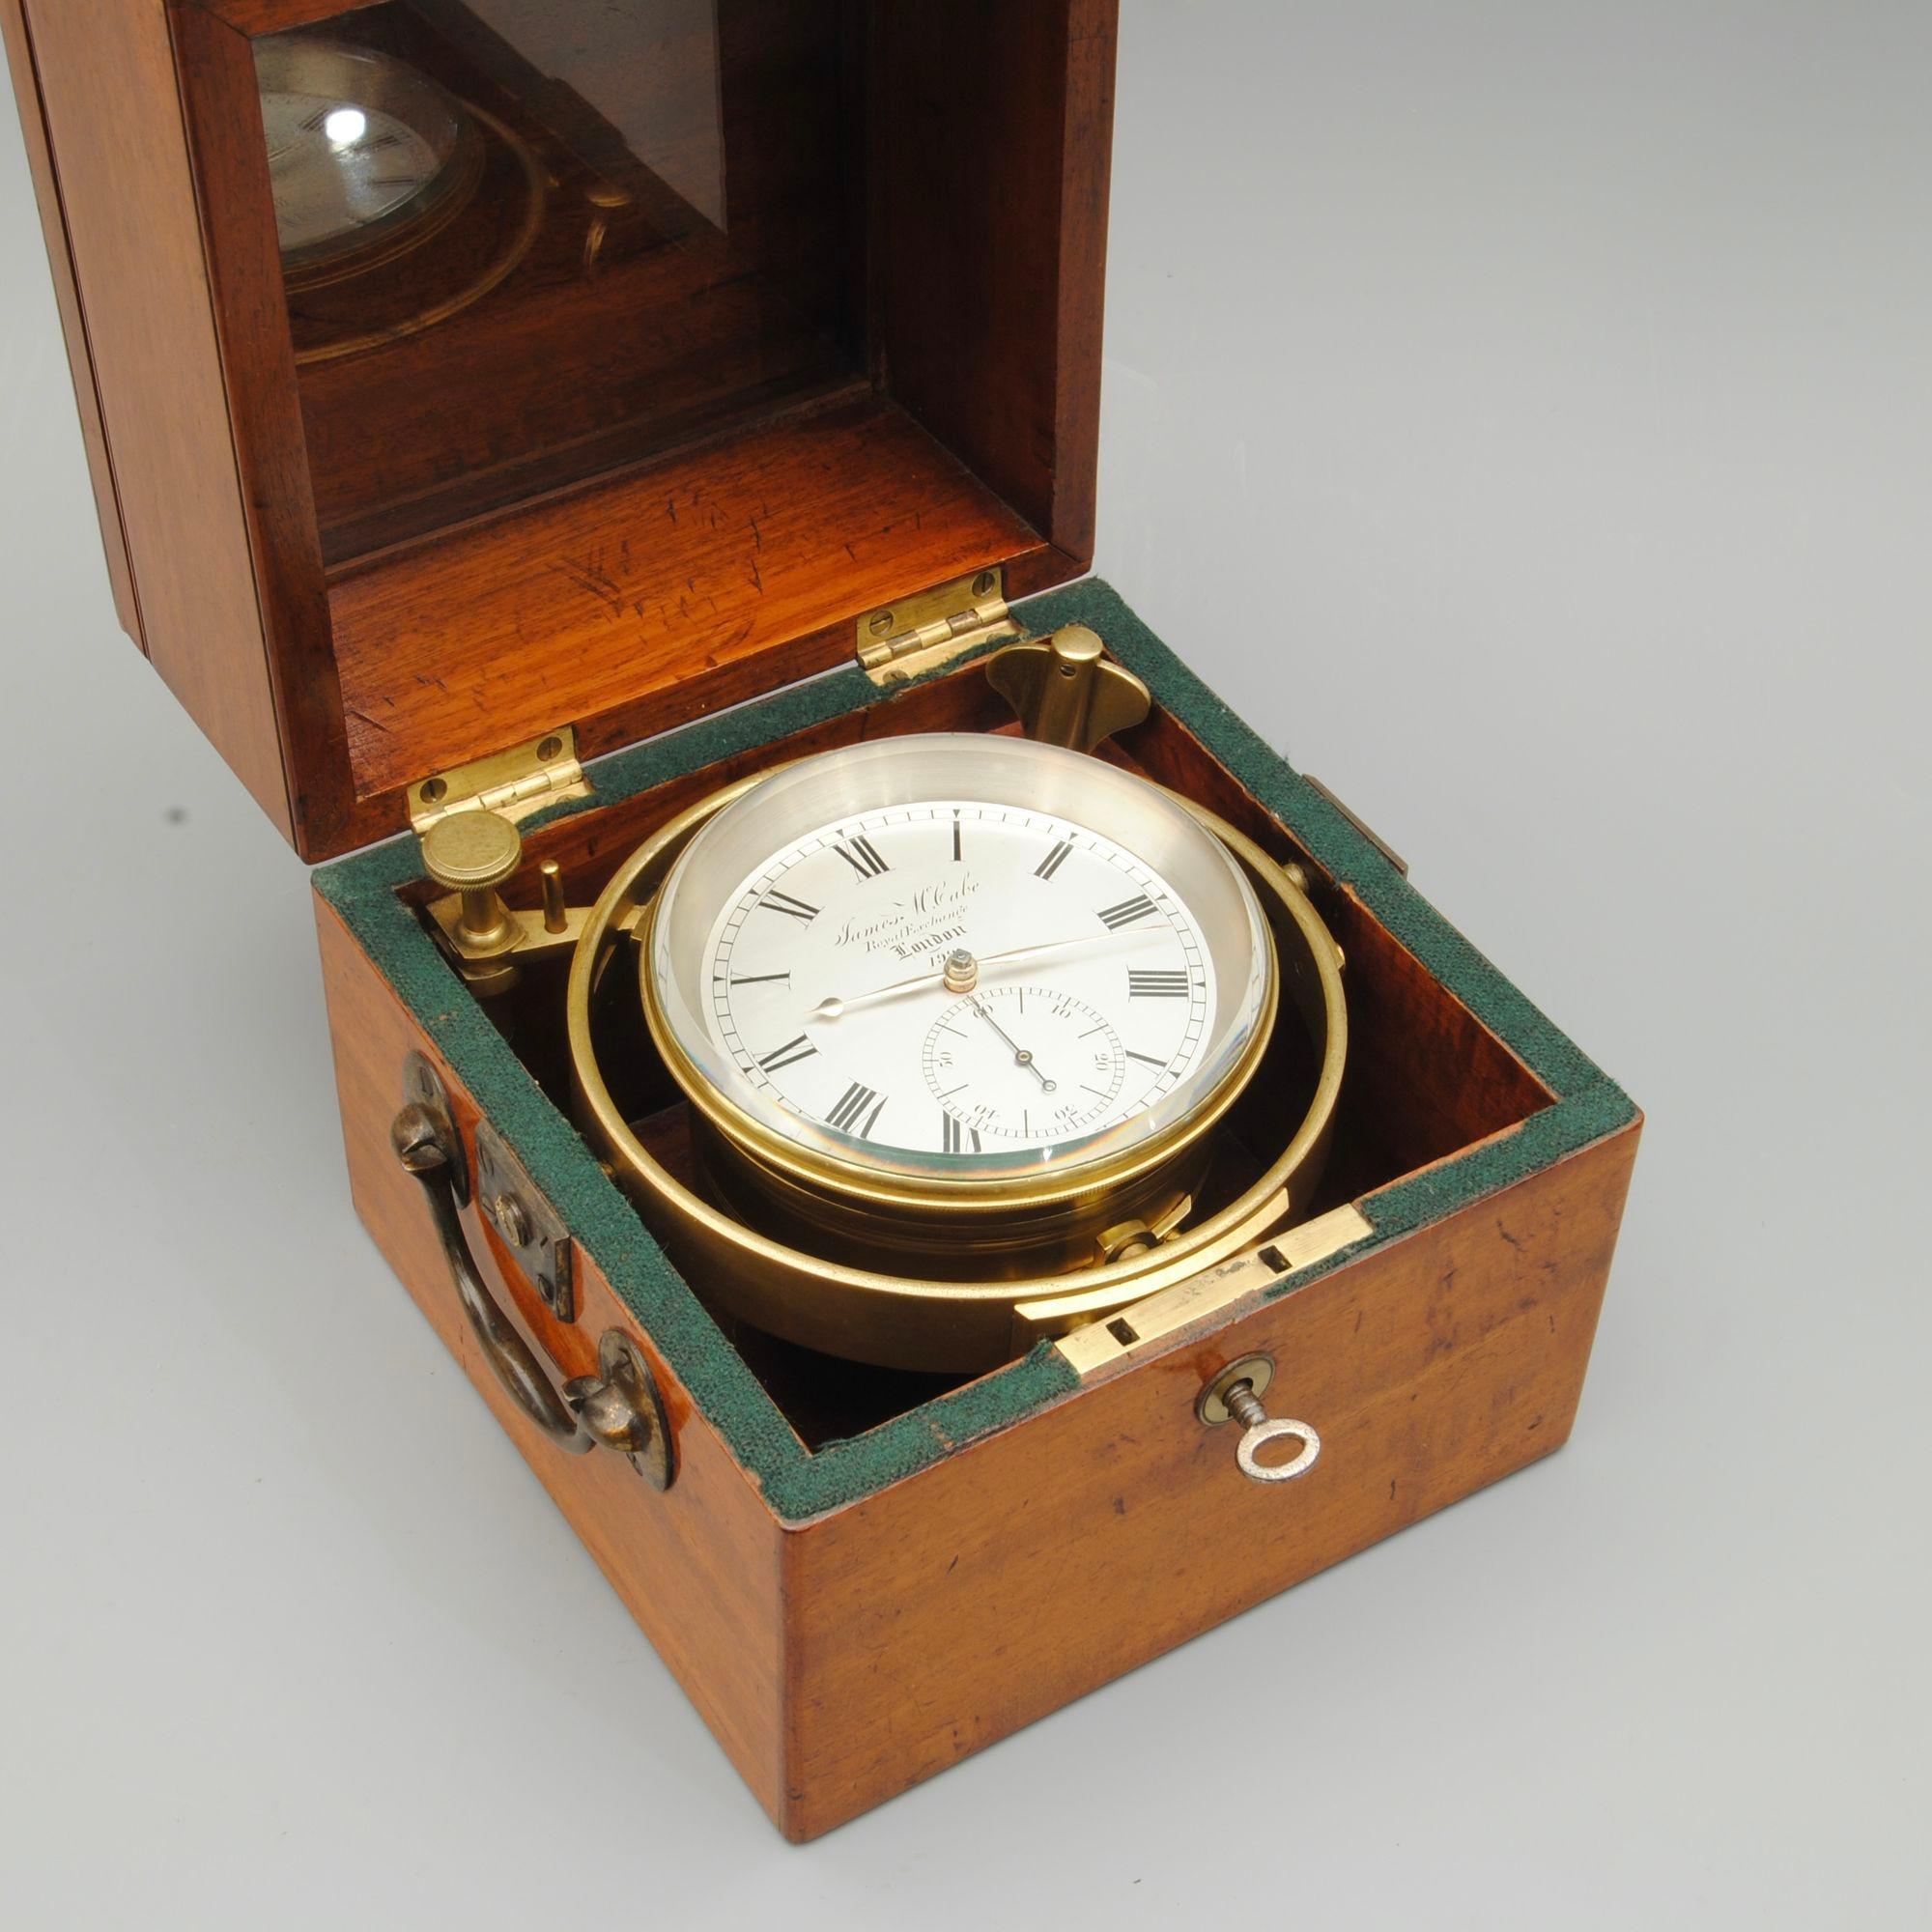 Number 199, a two day marine chronometer by James McCabe, London, beautifully signed and numbered on the dial and movement, and the number on the bottom of the bowl. In a three part mahogany case now with an enamel plaque. 
Unusually this fine